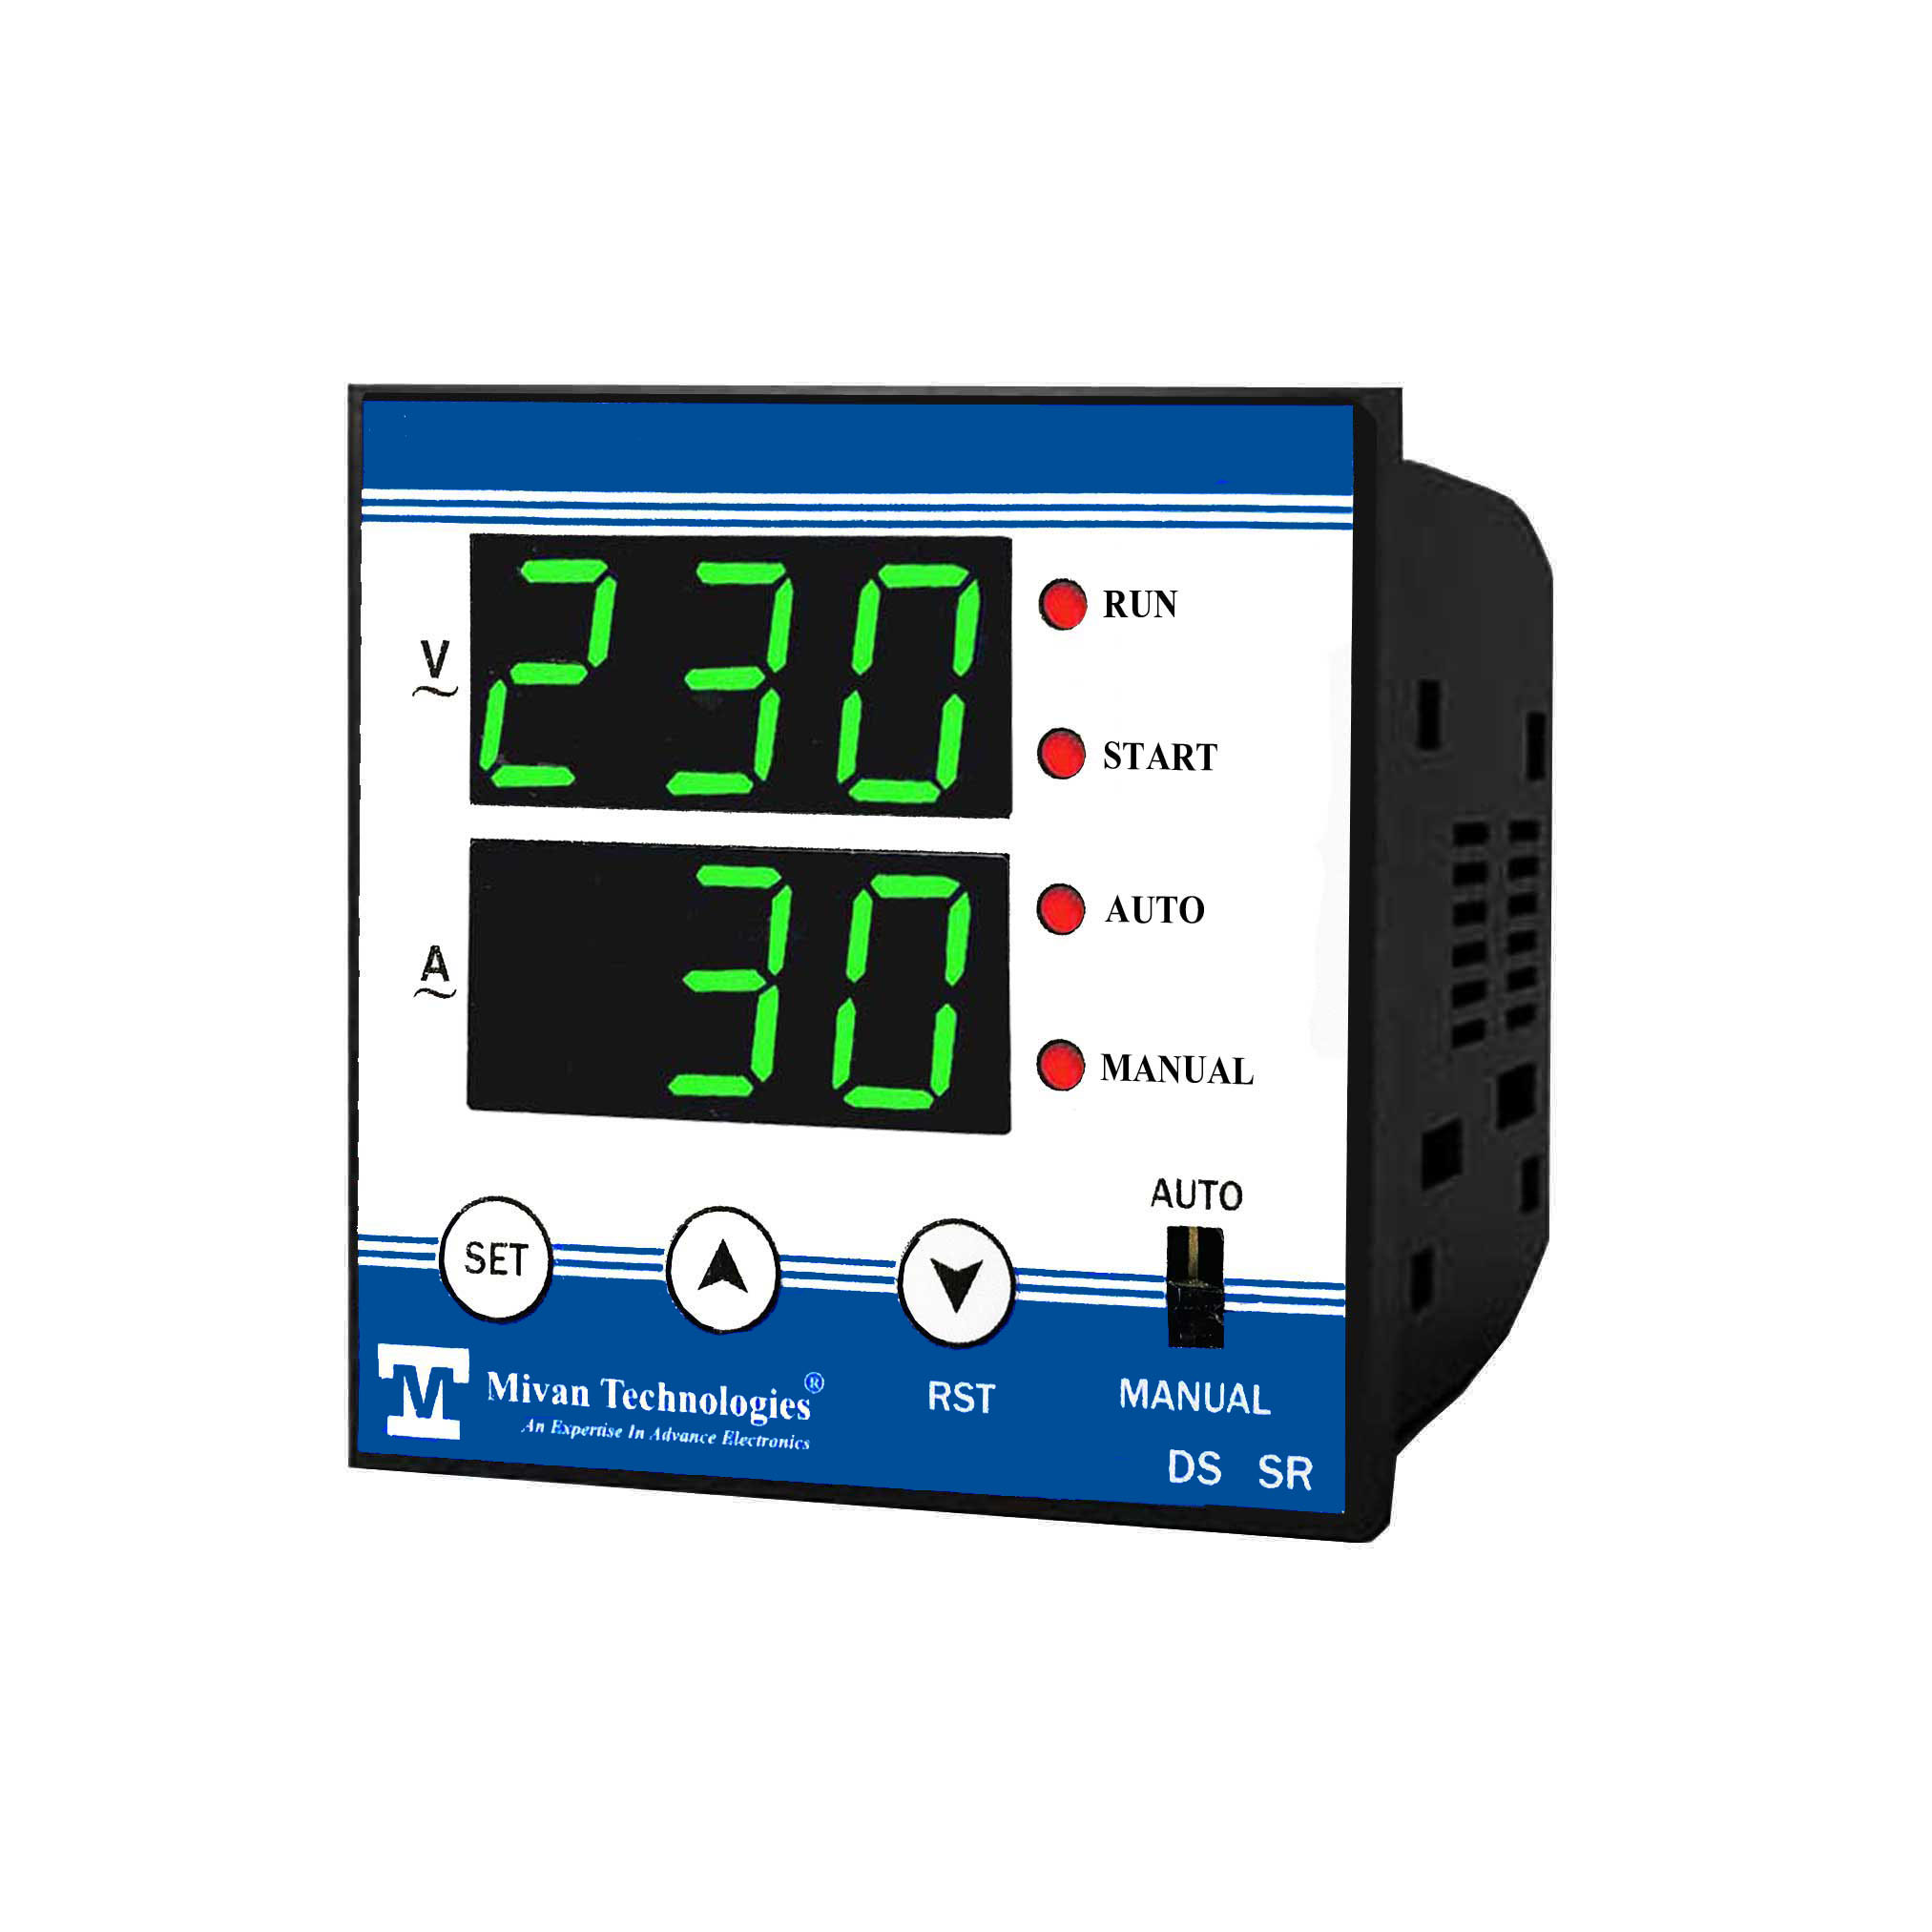 SPD 7212 instrument to design any hp single phase Digital motor starter panel with volt and amp meter with HV LV OL DRY RUN Protection with CYCLIC timer